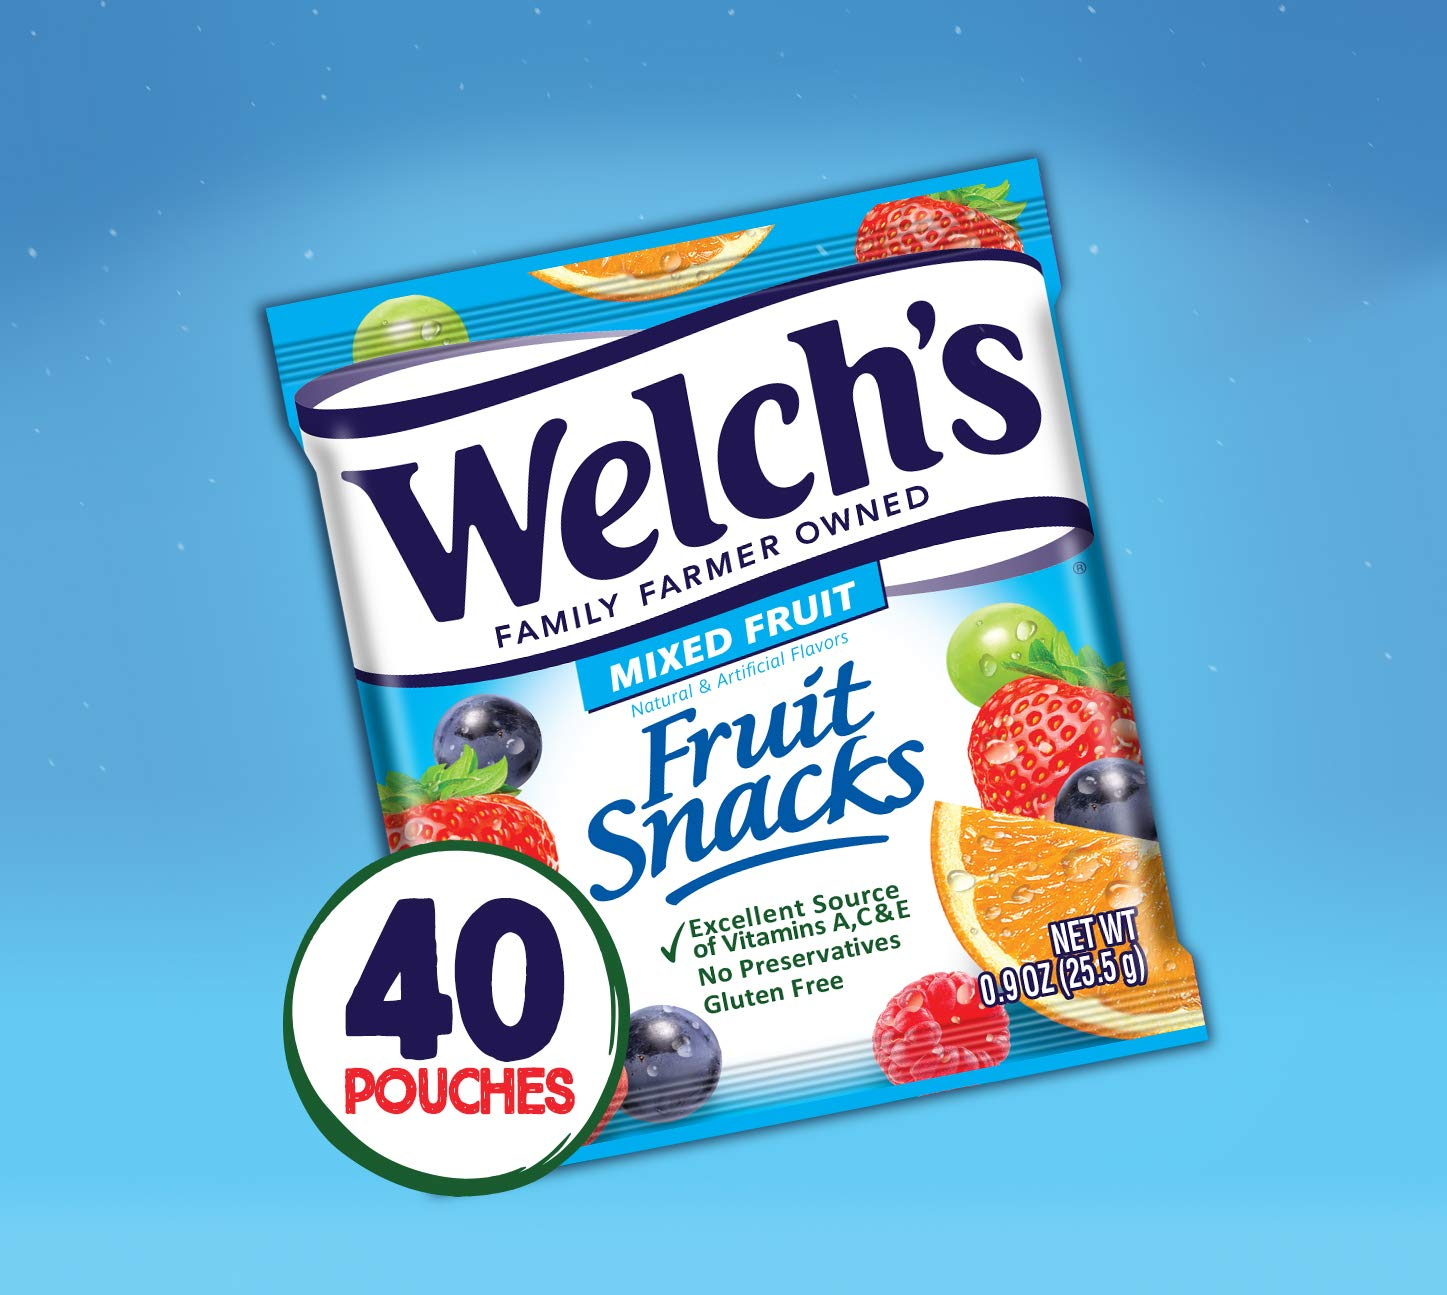 Welch'S Fruit Snacks, Mixed Fruit, Gluten Free, Bulk Pack, 0.9 Oz Individual Single Serve Bags 40 Count (Pack of 1)